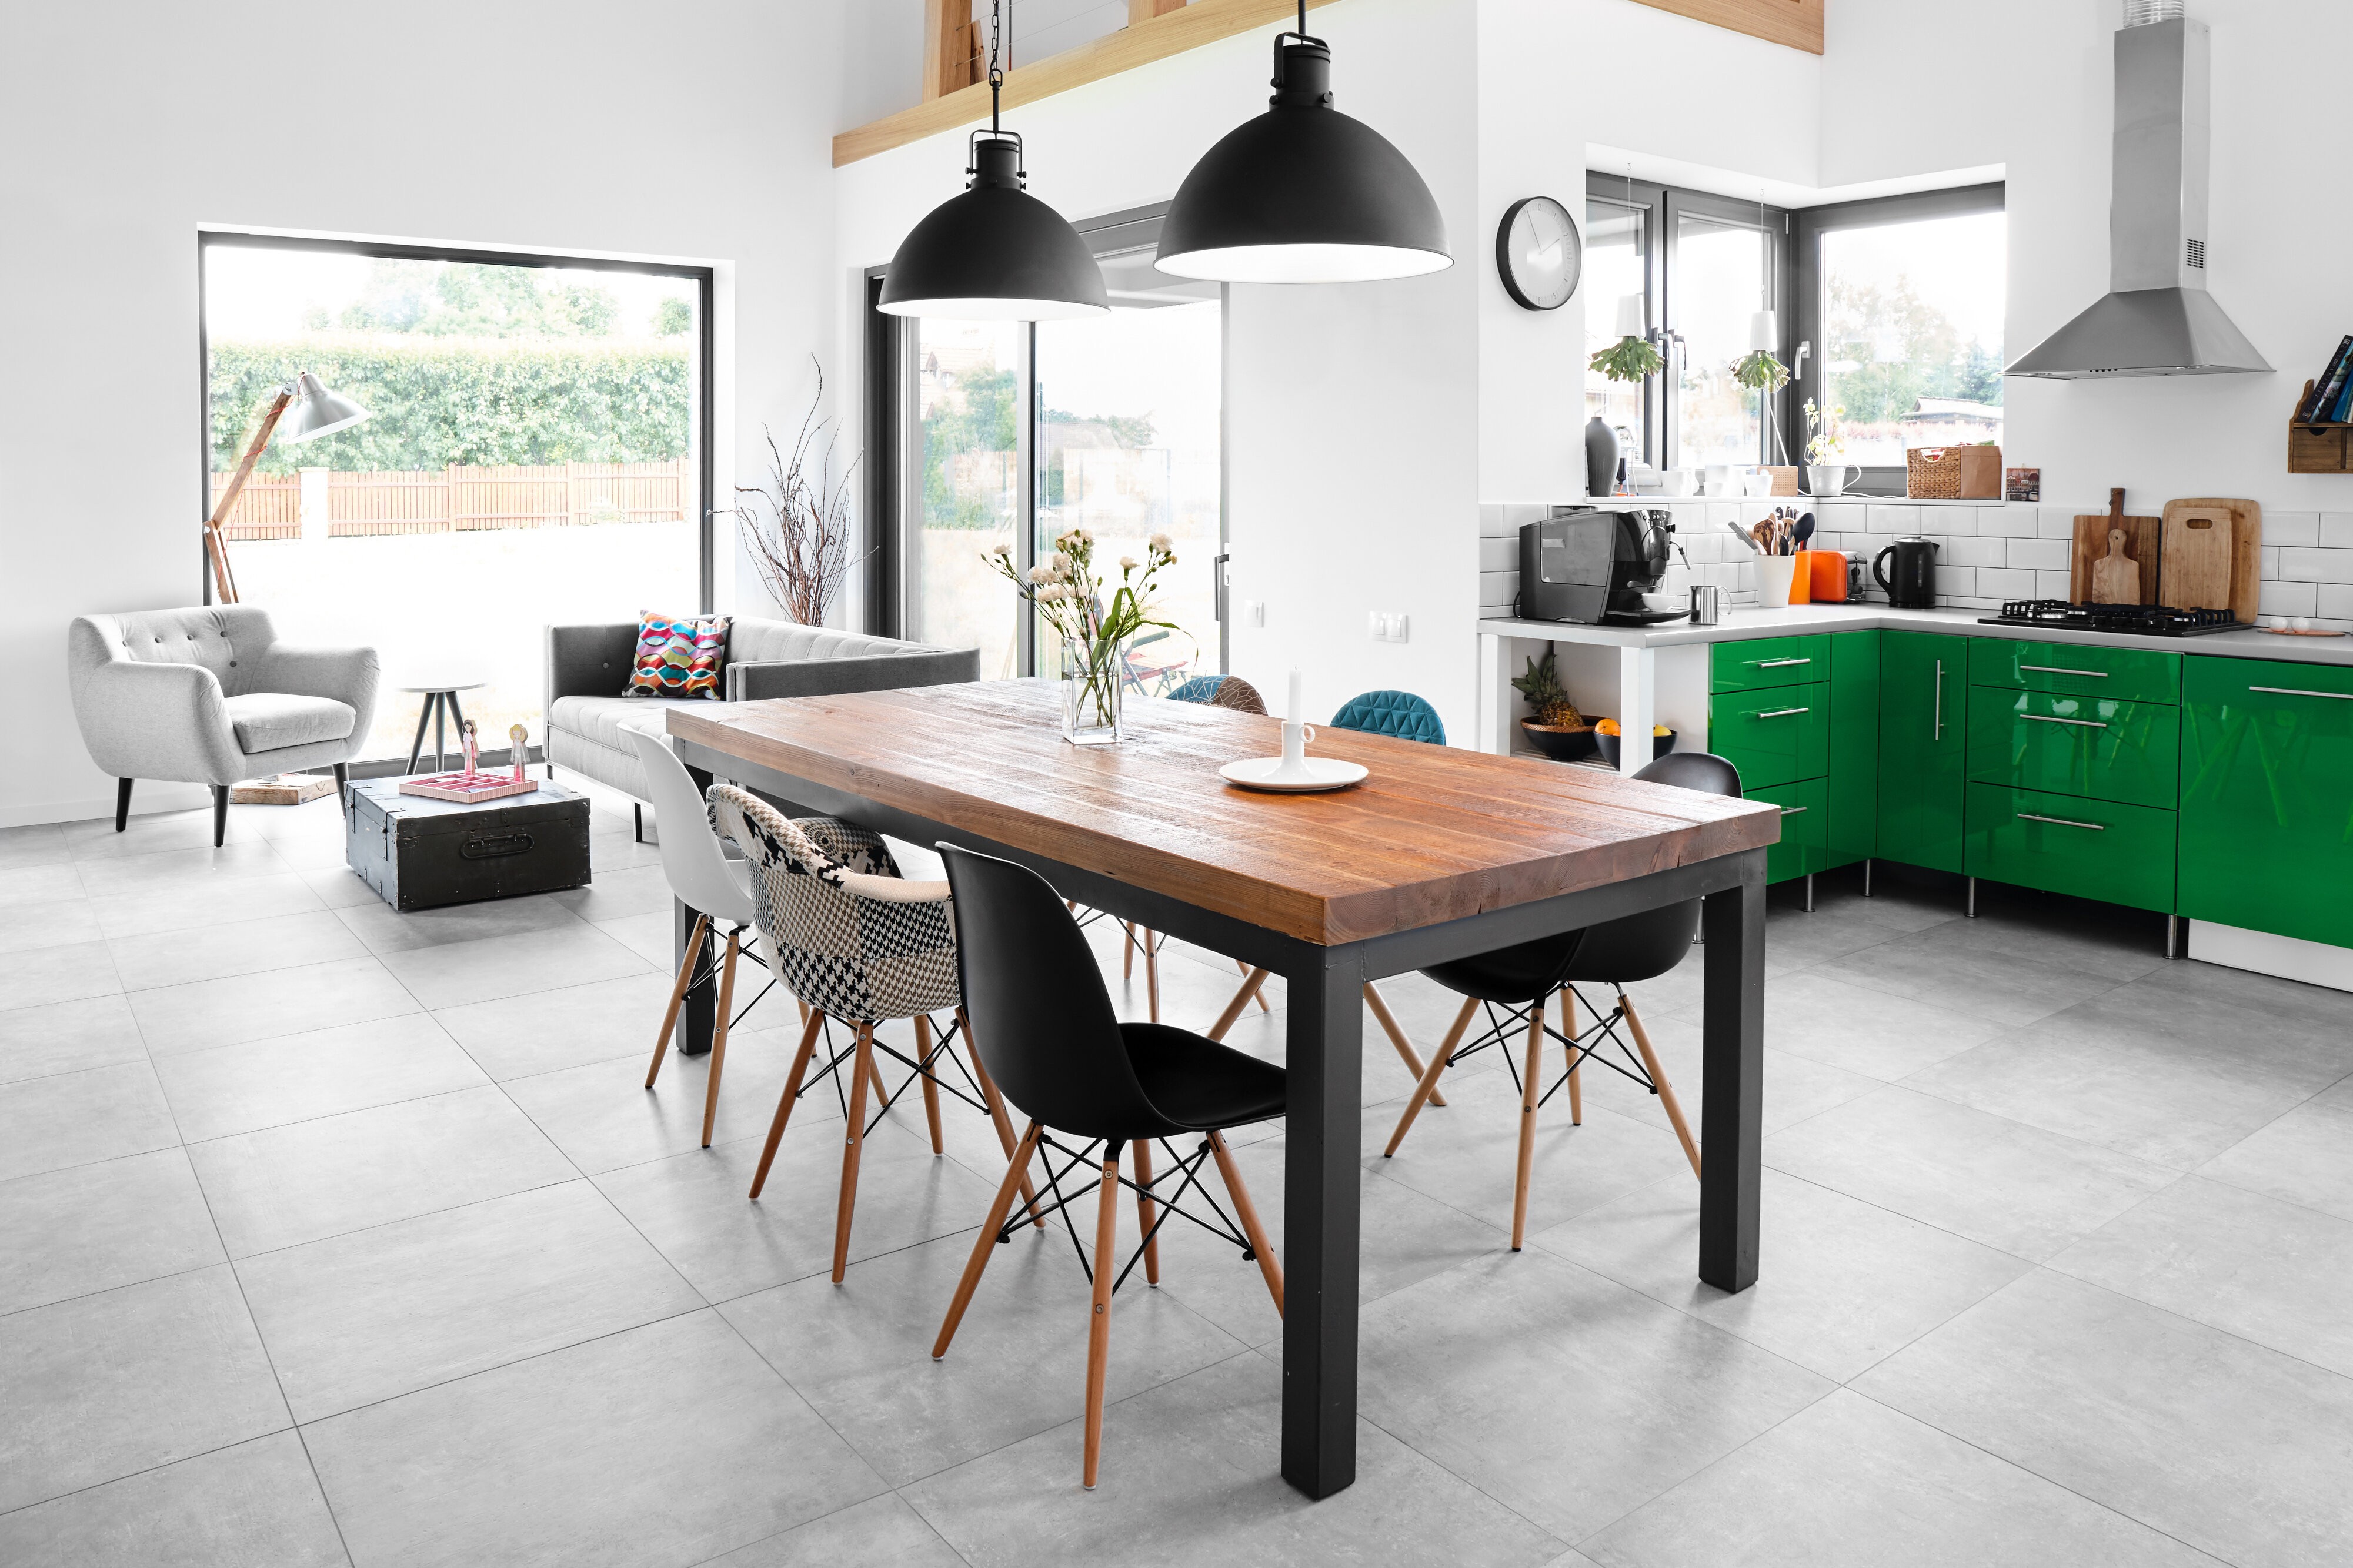 What to Consider When Buying a Dining Table - Foter